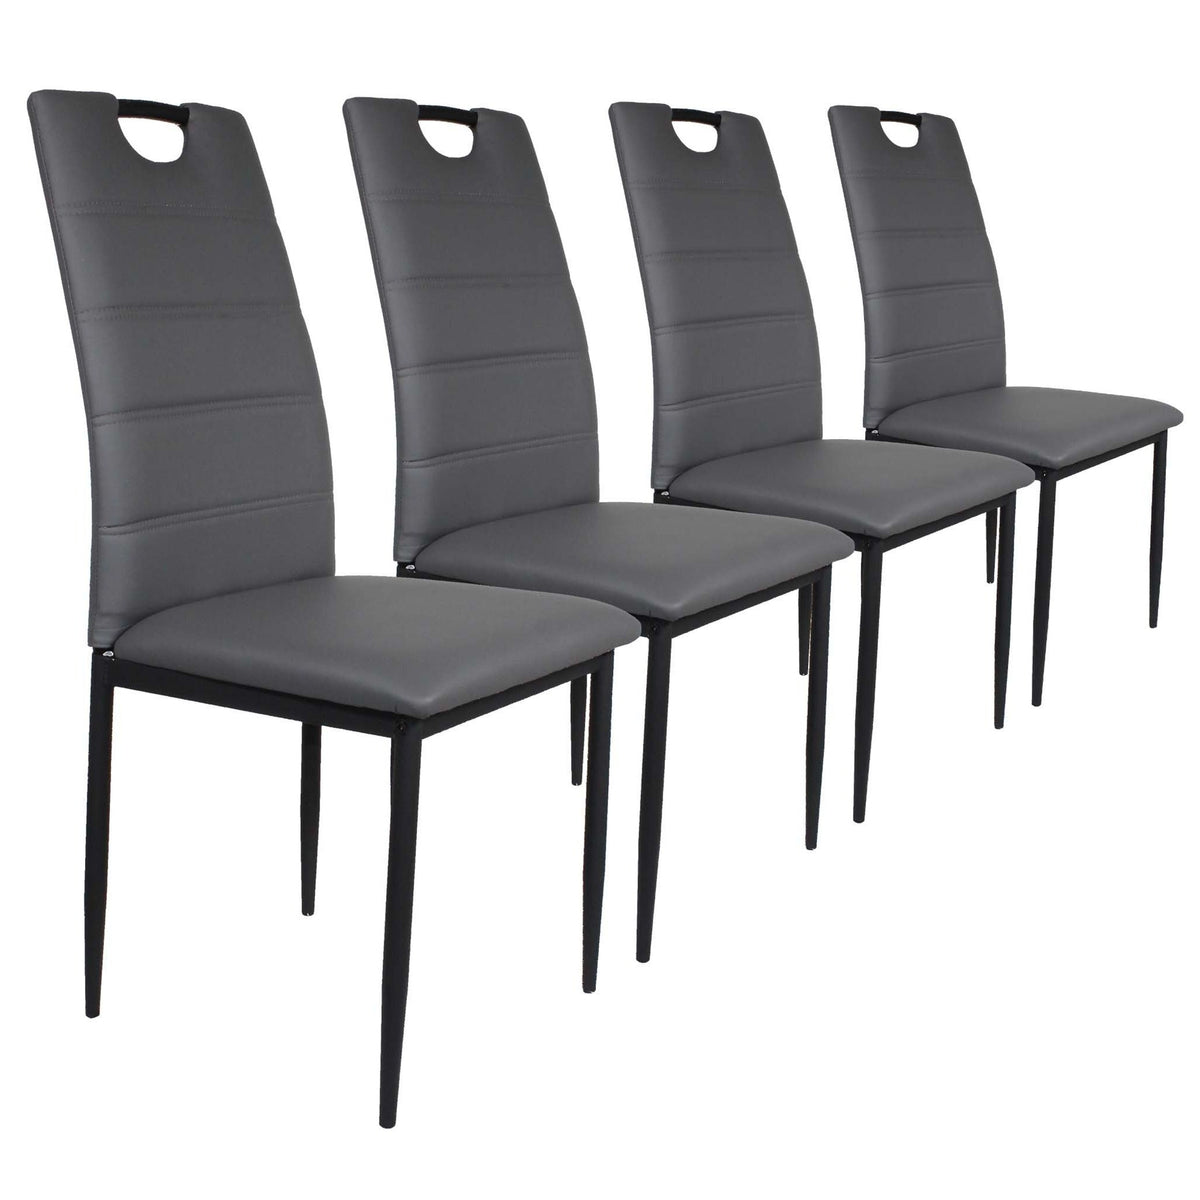 Wheaton Dining Chair - Set of 4 Chairs - by Roseland Furniture